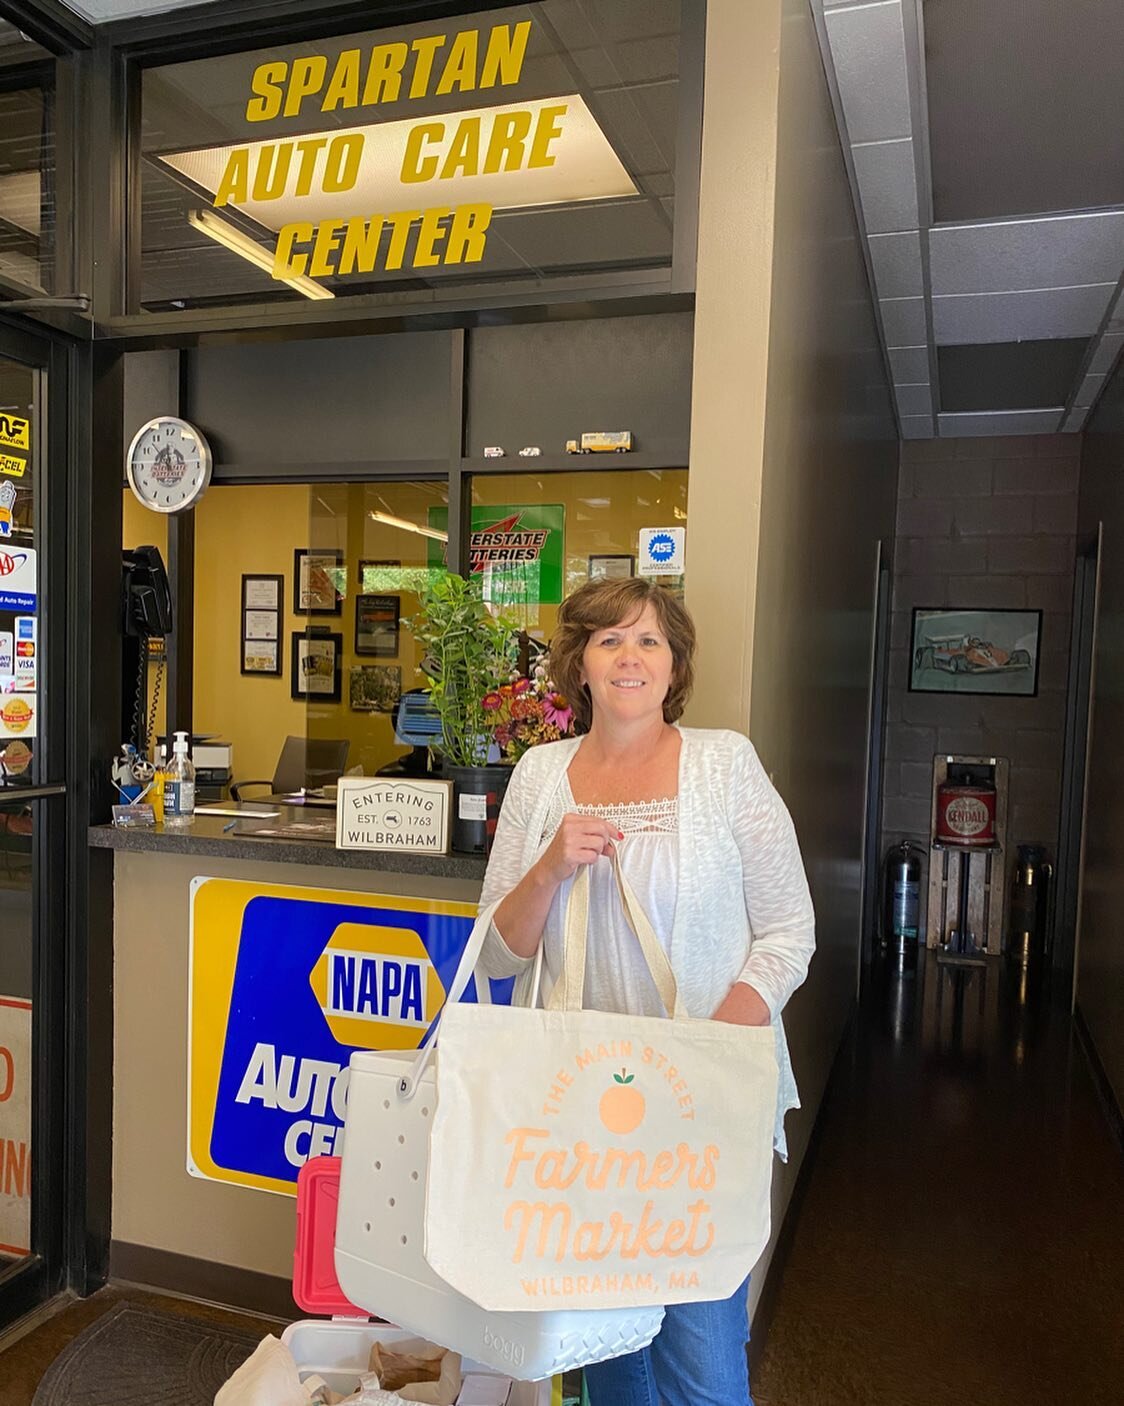 Congratulations to Debbie, winner of the Summer Fun Giveaway! Go visit her and her family for all your car needs at Spartan Auto Care Center! They are located at 2714 Boston Road! 

Thank you to all of our vendors who participated in this incredible 